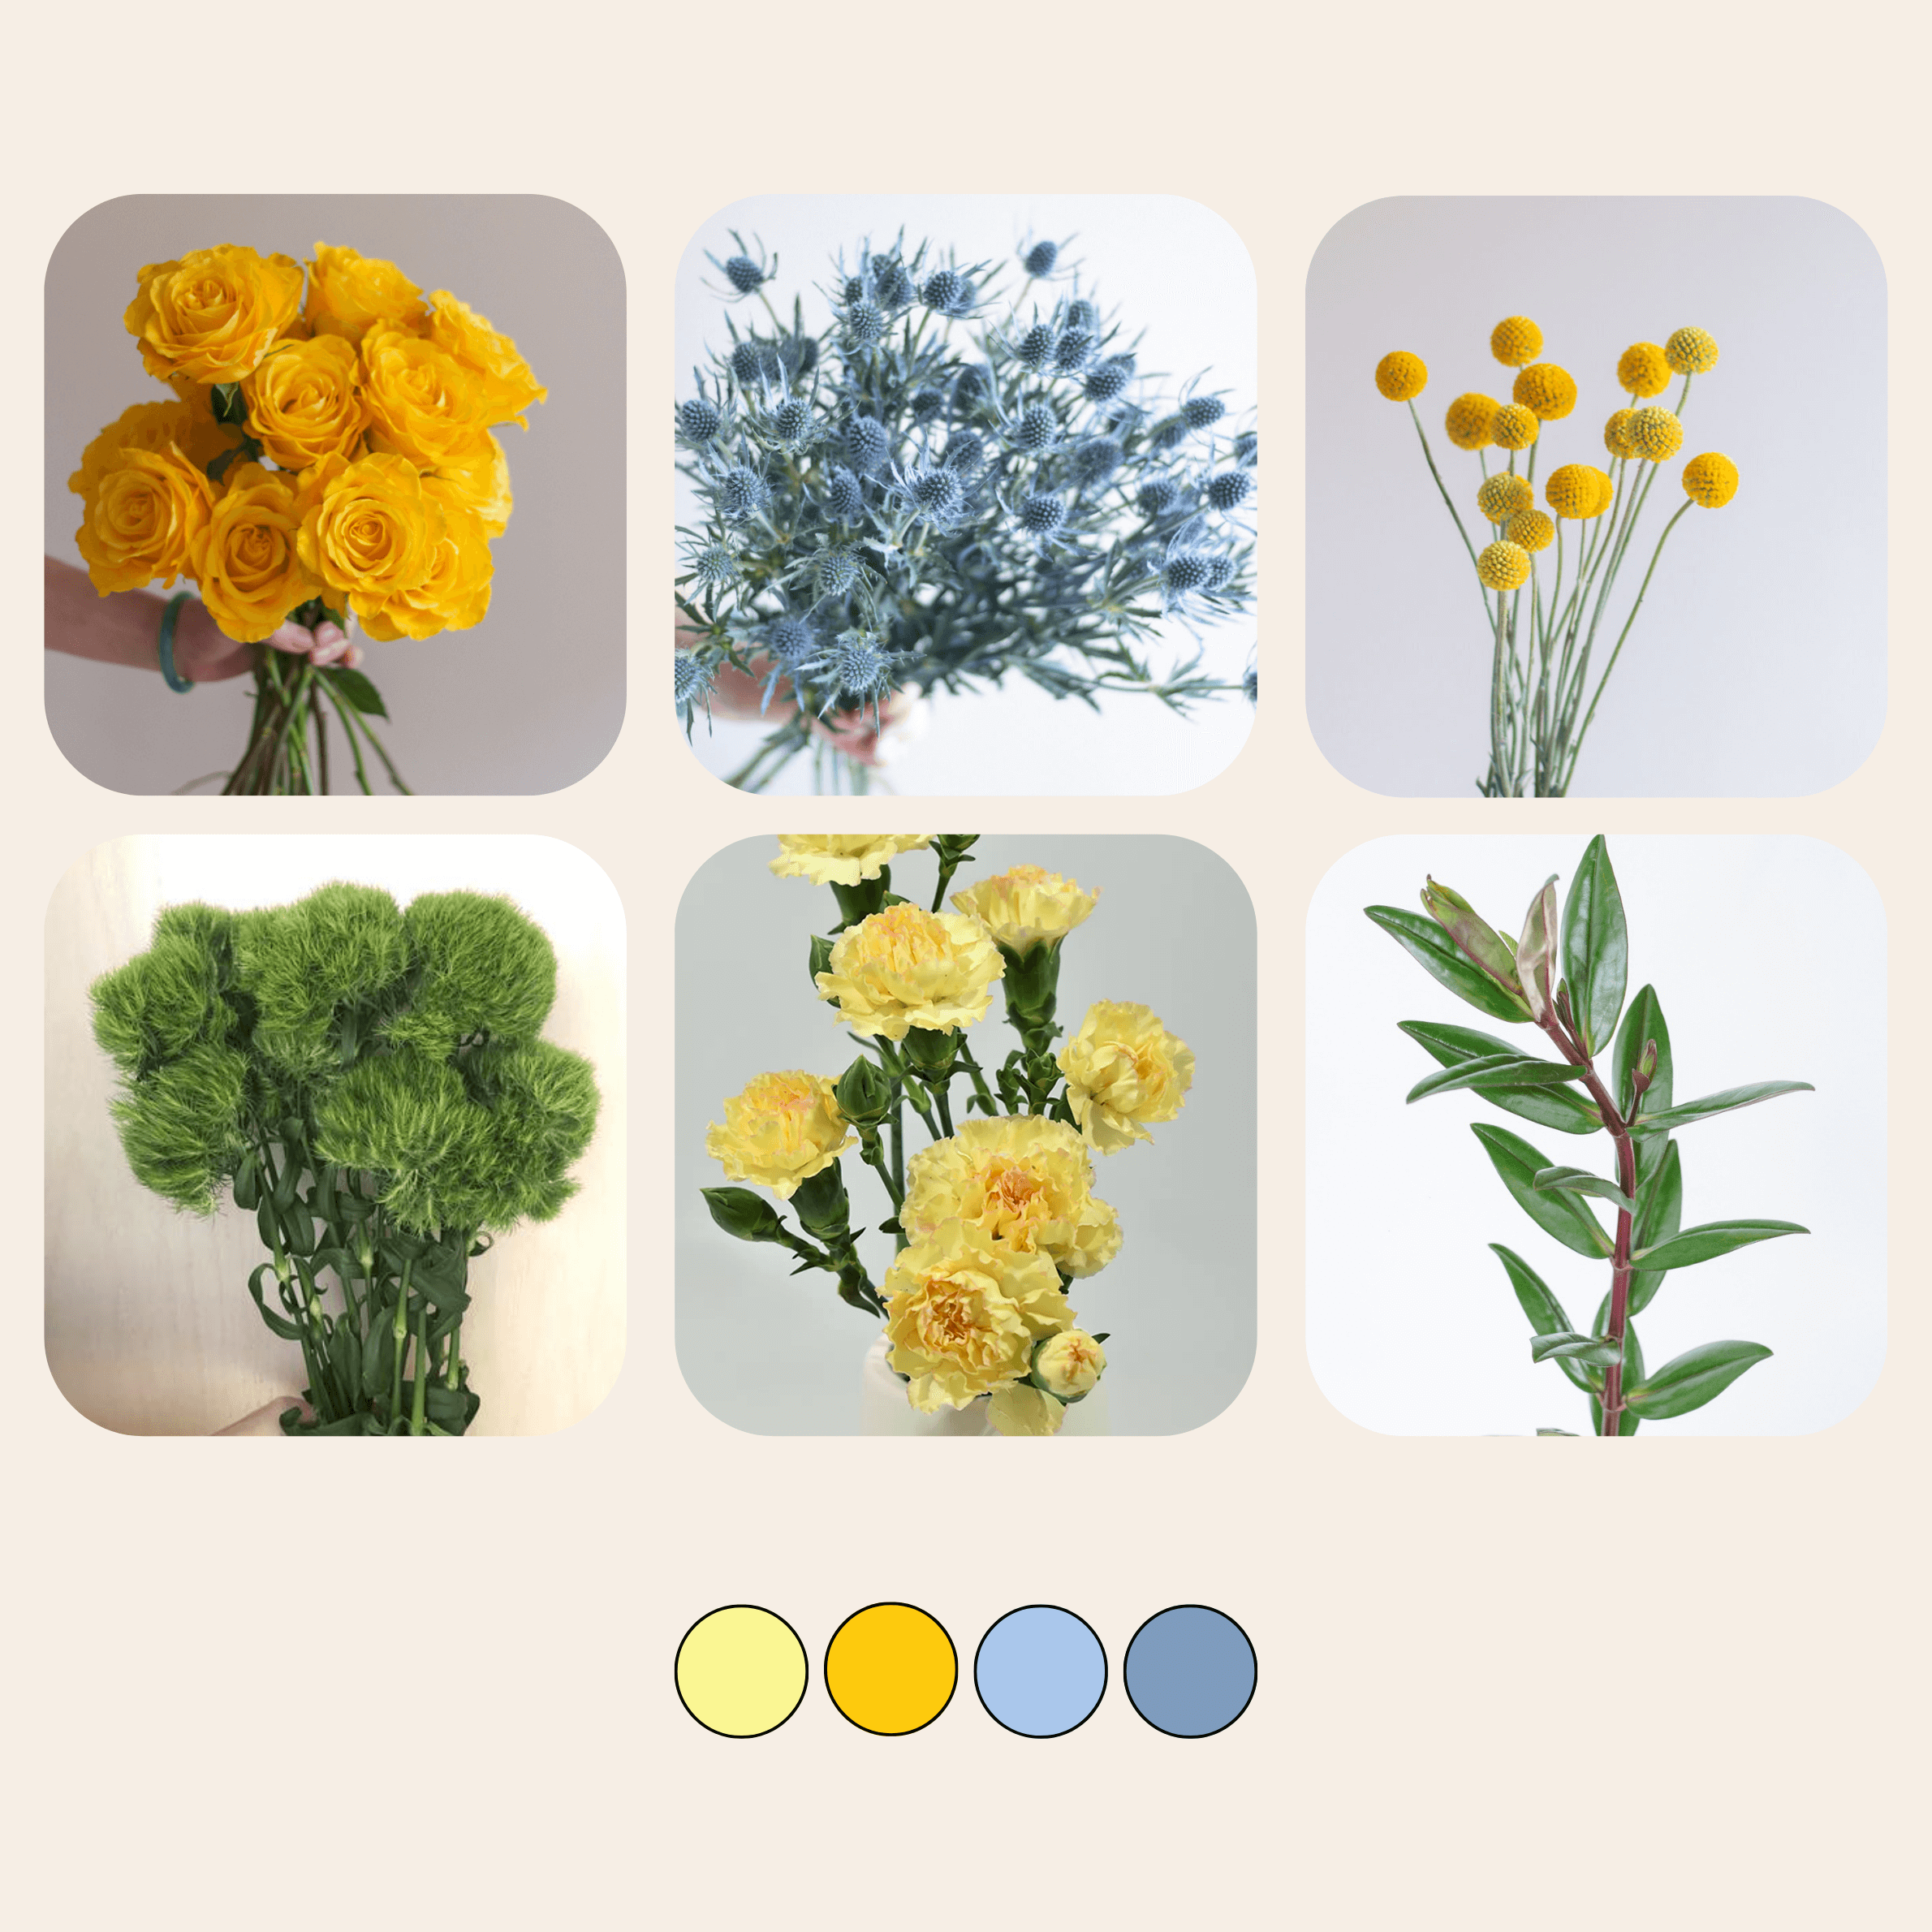 blue and yellow diy flower box